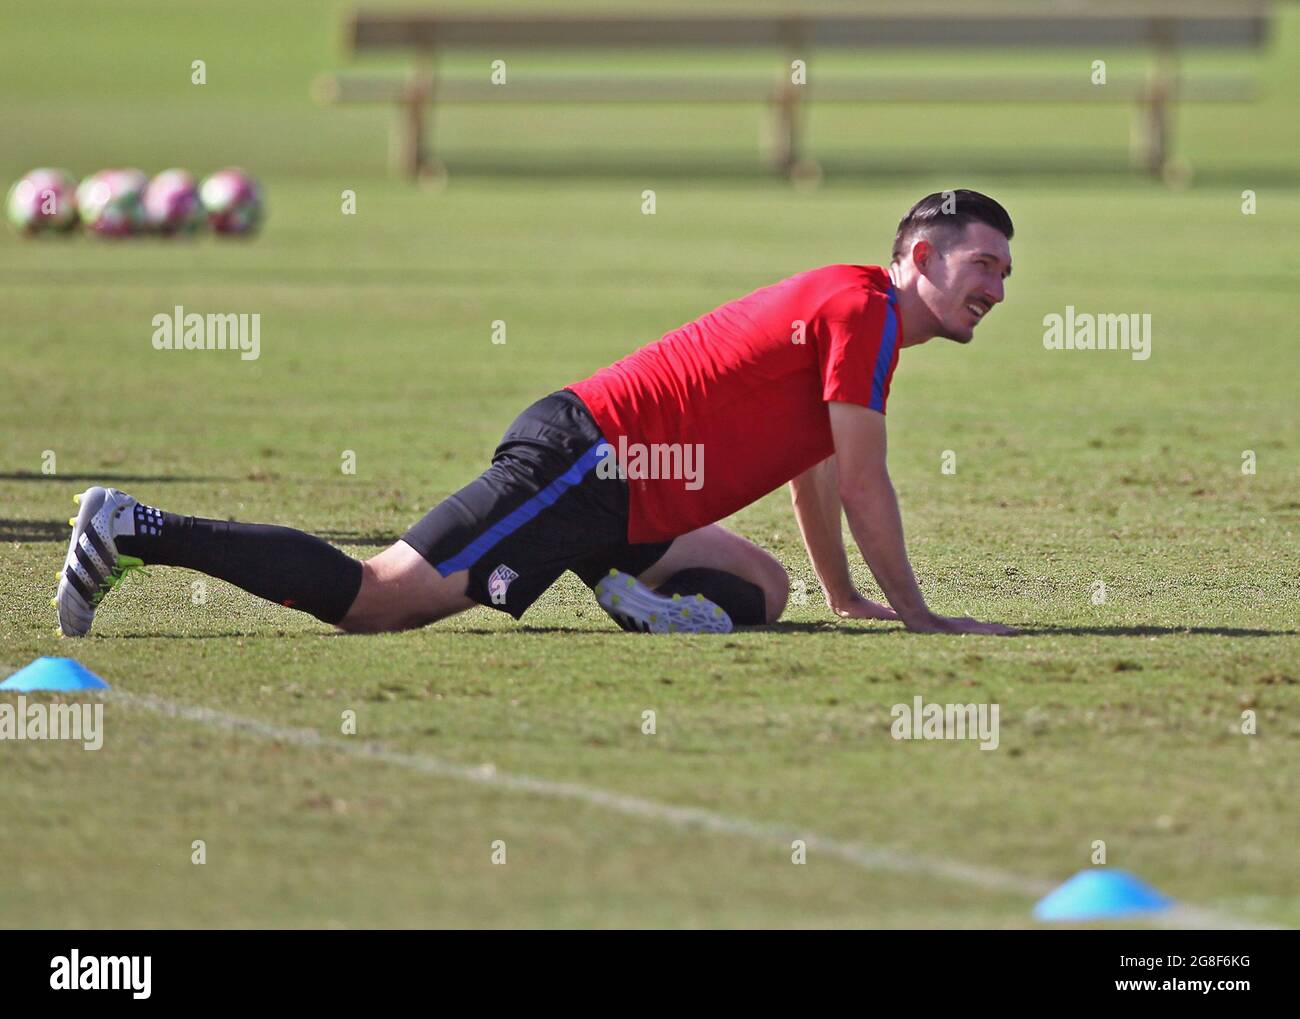 Miami Shores, USA. 03rd Oct, 2016. Sacha Kljestan stretches during a U.S. National Soccer Team practice on Monday, Oct. 3, 2016, at Buccaneer Field in Miami Shores, Florida. (Photo by Carl Juste/Miami Herald/TNS/Sipa USA) Credit: Sipa USA/Alamy Live News Stock Photo